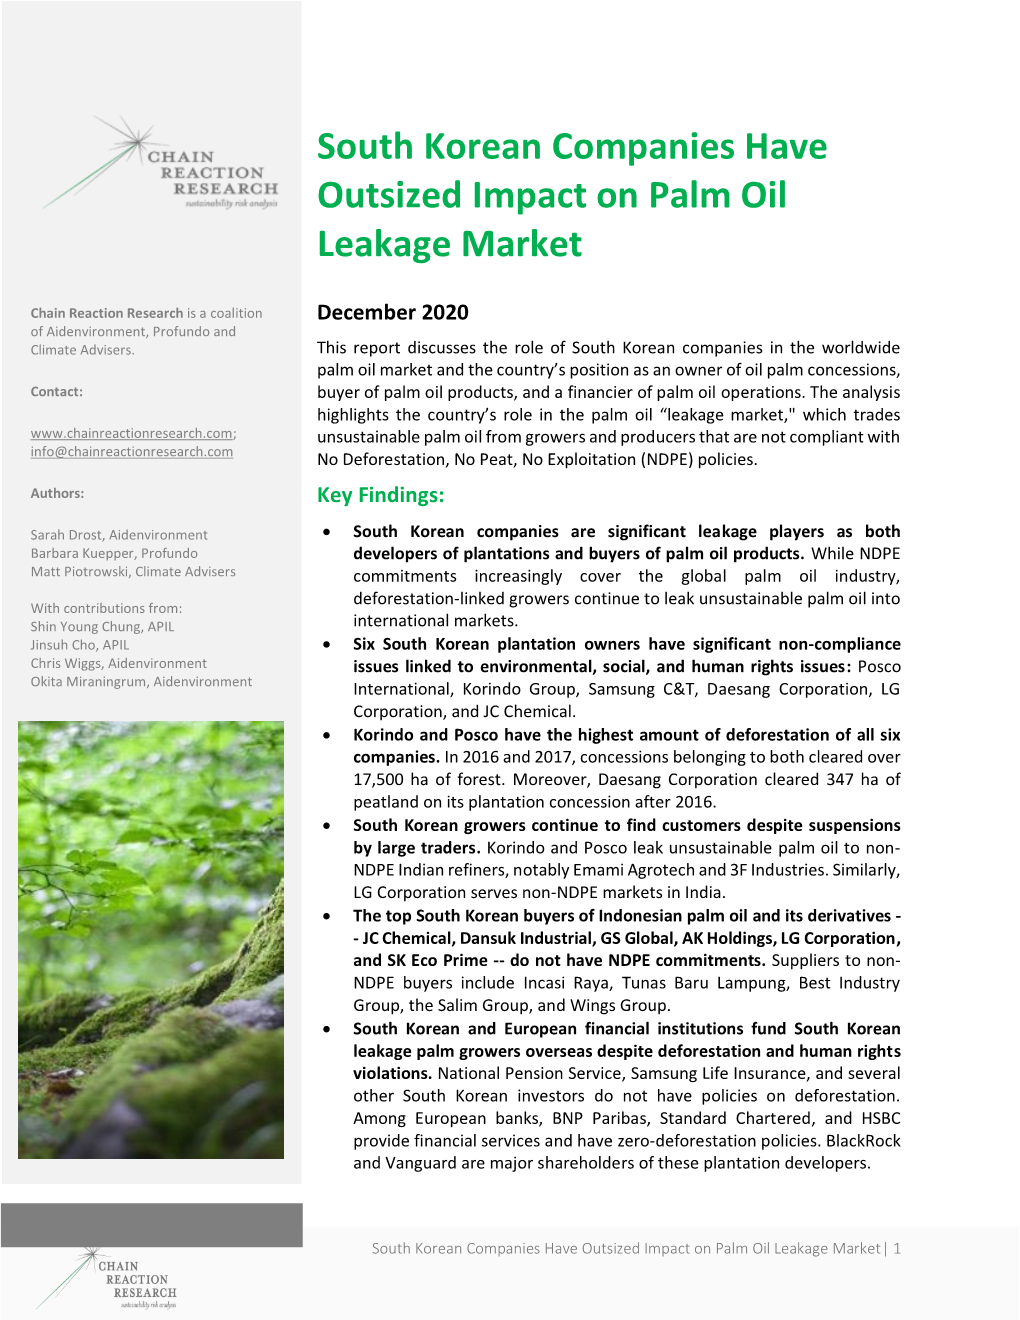 South Korean Companies Have Outsized Impact on Palm Oil Leakage Market